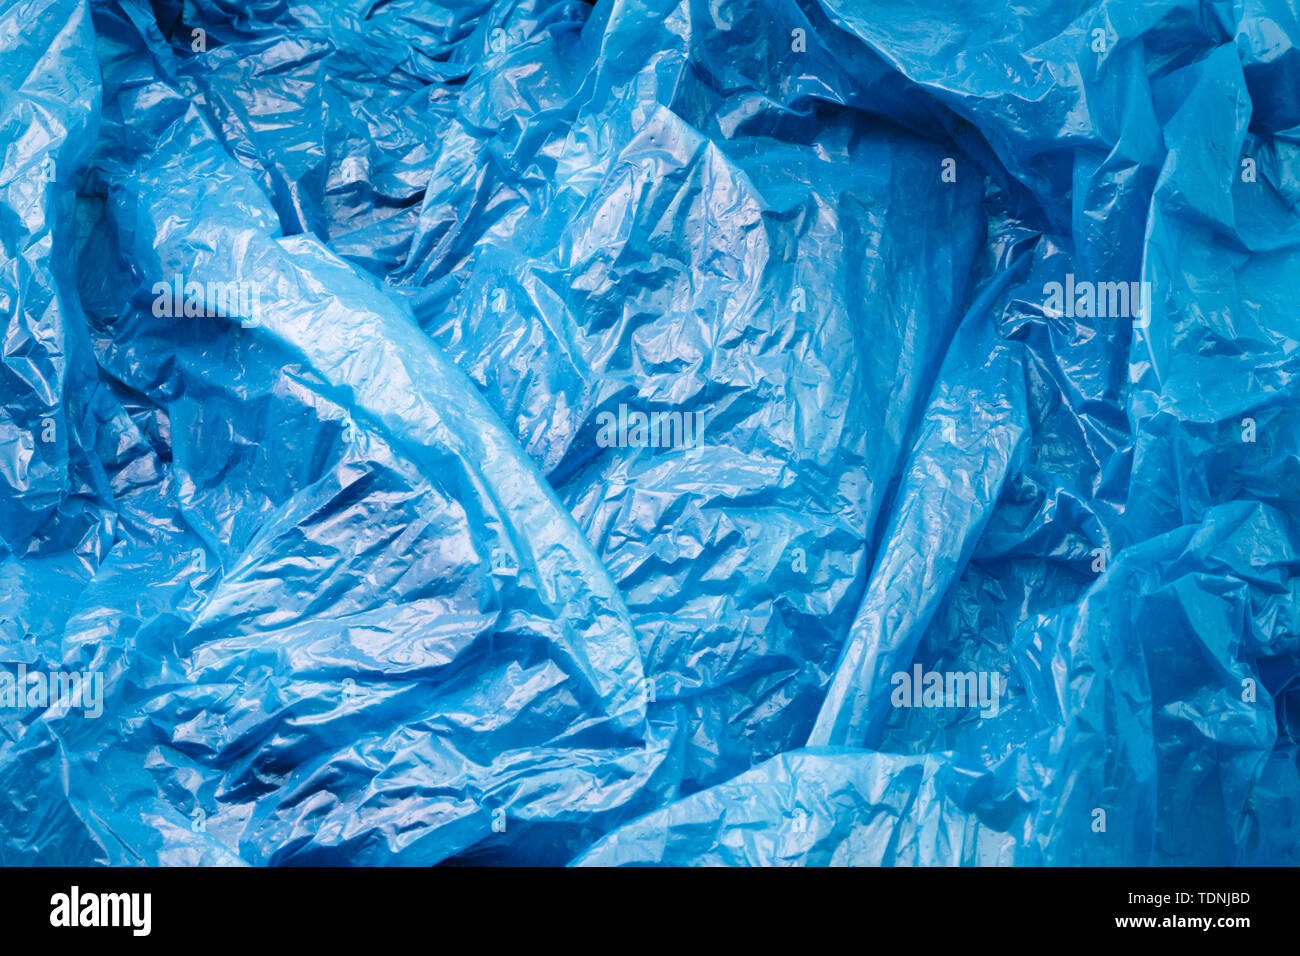 Blue Plastic Bag Texture. Abstract Wrinkled Background of Plastic Garbage  Stock Photo - Alamy